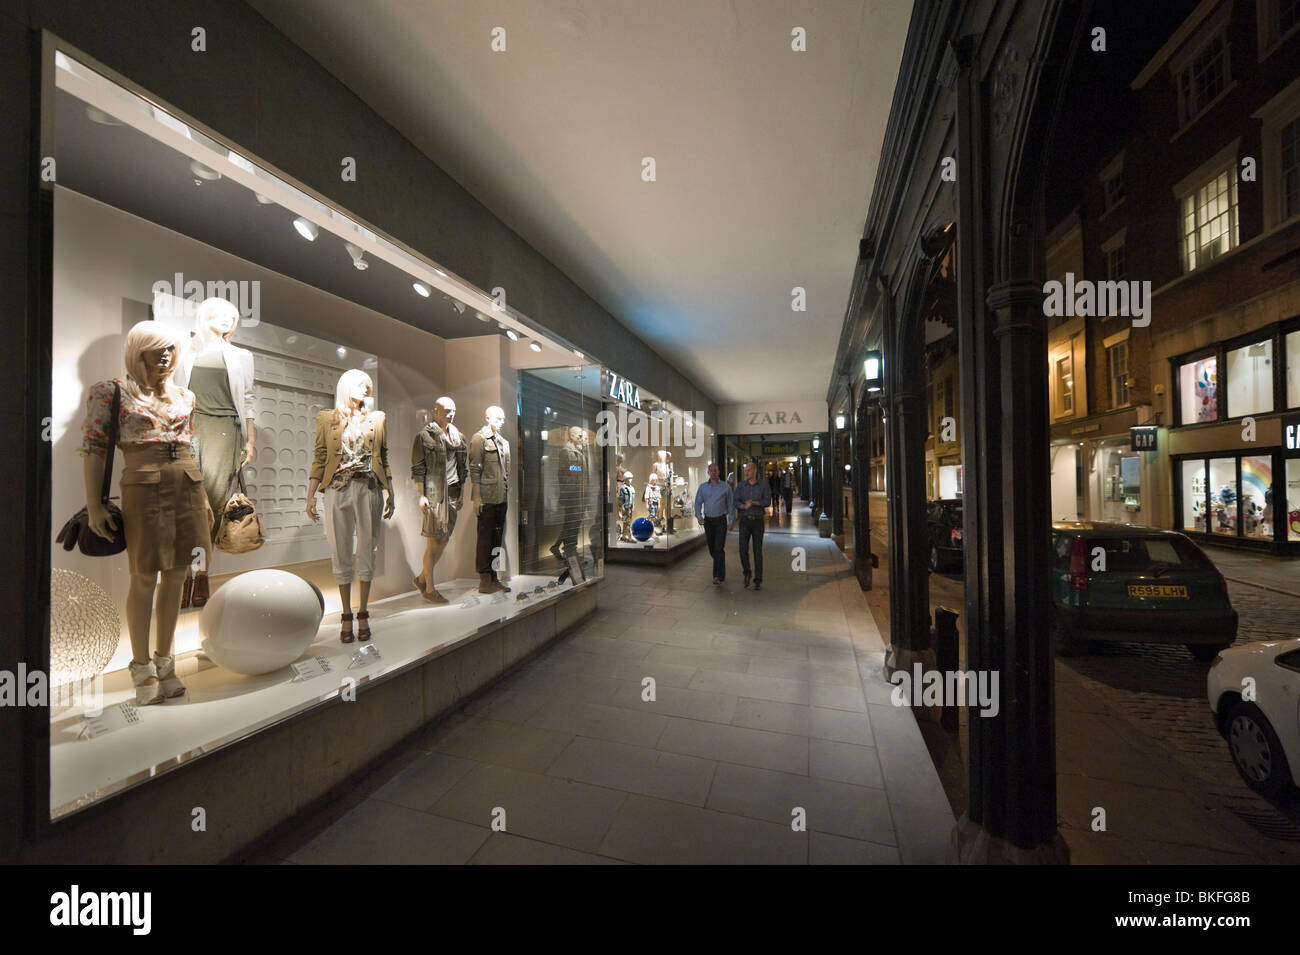 The Zara store at night on Eastgate, one of The Rows in the historic centre  of Chester, Cheshire, England, UK Stock Photo - Alamy